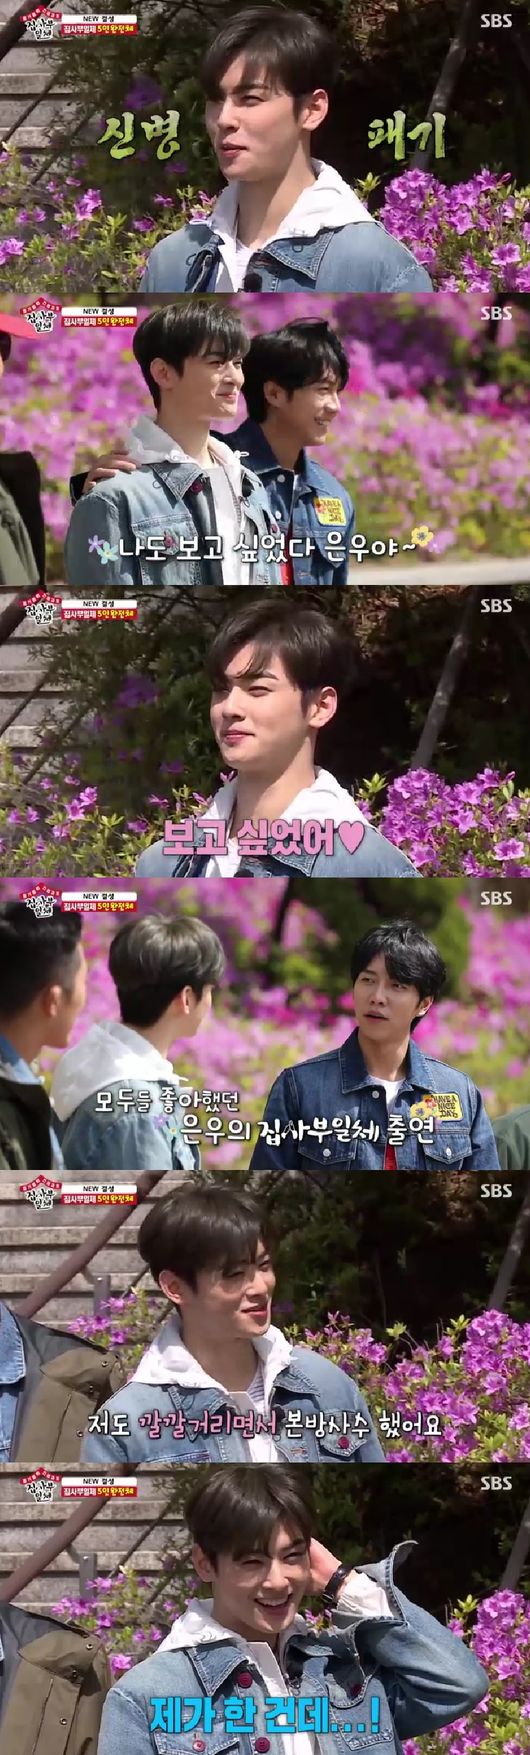 Cha Eun-woo and Lee Seung-gi caught the eye by making a big-time broody match.In the SBS entertainment program All The Butlers broadcasted on the 3rd, Olympia Games mania Cha Eun-woo played an active role.Kim Dong-Hyun and Cha Eun-woo joined the All The Butlers as new Mumbers.First, Cha Eun-woo told his brothers to express his feelings in five letters, saying, I wanted to see.The members were delighted that we cast Jung Eun-woo.In the meantime, All The Butlers joined the youngest, saying, I will do my best, I will report.The crew told the members that they would be with the hero masters. They were the Olympic Games N-gwan players.Yang Hak-Seon, a gymnast who won the first gold medal in Korean gymnastics history, appeared. Next, Taekwondos pride Lee Dae-hoon, who is ranked number one in Taekwondo world, also appeared and cheered everyone with his ability to defeat.Continuing to shoot Jin Jong-oh entered with pride.Each asked about his career: Jin Jong-oh said that the medal totaled six, and Cha Eun-woo said, I know four golds and two silvers.Yang Hak-Seon said, The technology for 10 years has been able to do only for me so far, and the technical name is Yang Hak-Seon, and Cha Eun-woo showed up as an Olympian game mania, saying, I know it as the first gold medal in Korean gymnastics history.He was quick to kick 10 consecutive Power kicks, and Cha Eun-woo also challenged him to feel the power of the golden kick.Cha Eun-woo said, My face is red and I change it and I say, How do you kick well? But then he lost his center and fell down, making everyone laugh.Cha Eun-woo said, I was too strong to kick hard, but Lee Dae-hoon said, I was good enough to draw a virtue when I competed with me. Accuracy and power are important for scoring.Next, Jin Jong-oh showed shooting demonstrations; top legends also surprised everyone with their amazingly vibitan-sized shooting skills.He said, When patience time returns to achievement, confidence is the source of victory.The members all arrived at the shooting hall together. He showed the shooting demonstration first, and once again he showed ten dignity.Lee Dae-hoon suggested a dumbbelling match, saying that shootings basic training was weight, and with everyone eliminated, former church presidents Um Chin-a Bro, Cha Eun-woo and Lee Seung-gi played.Cha Eun-woo was eliminated with his arm bent while both proud geniuses were in the spotlight, and Lee Seung-gi was the final winner.In addition, as a special army officer of the army, he hit the 9-point line accurately andAll The Butlers capture